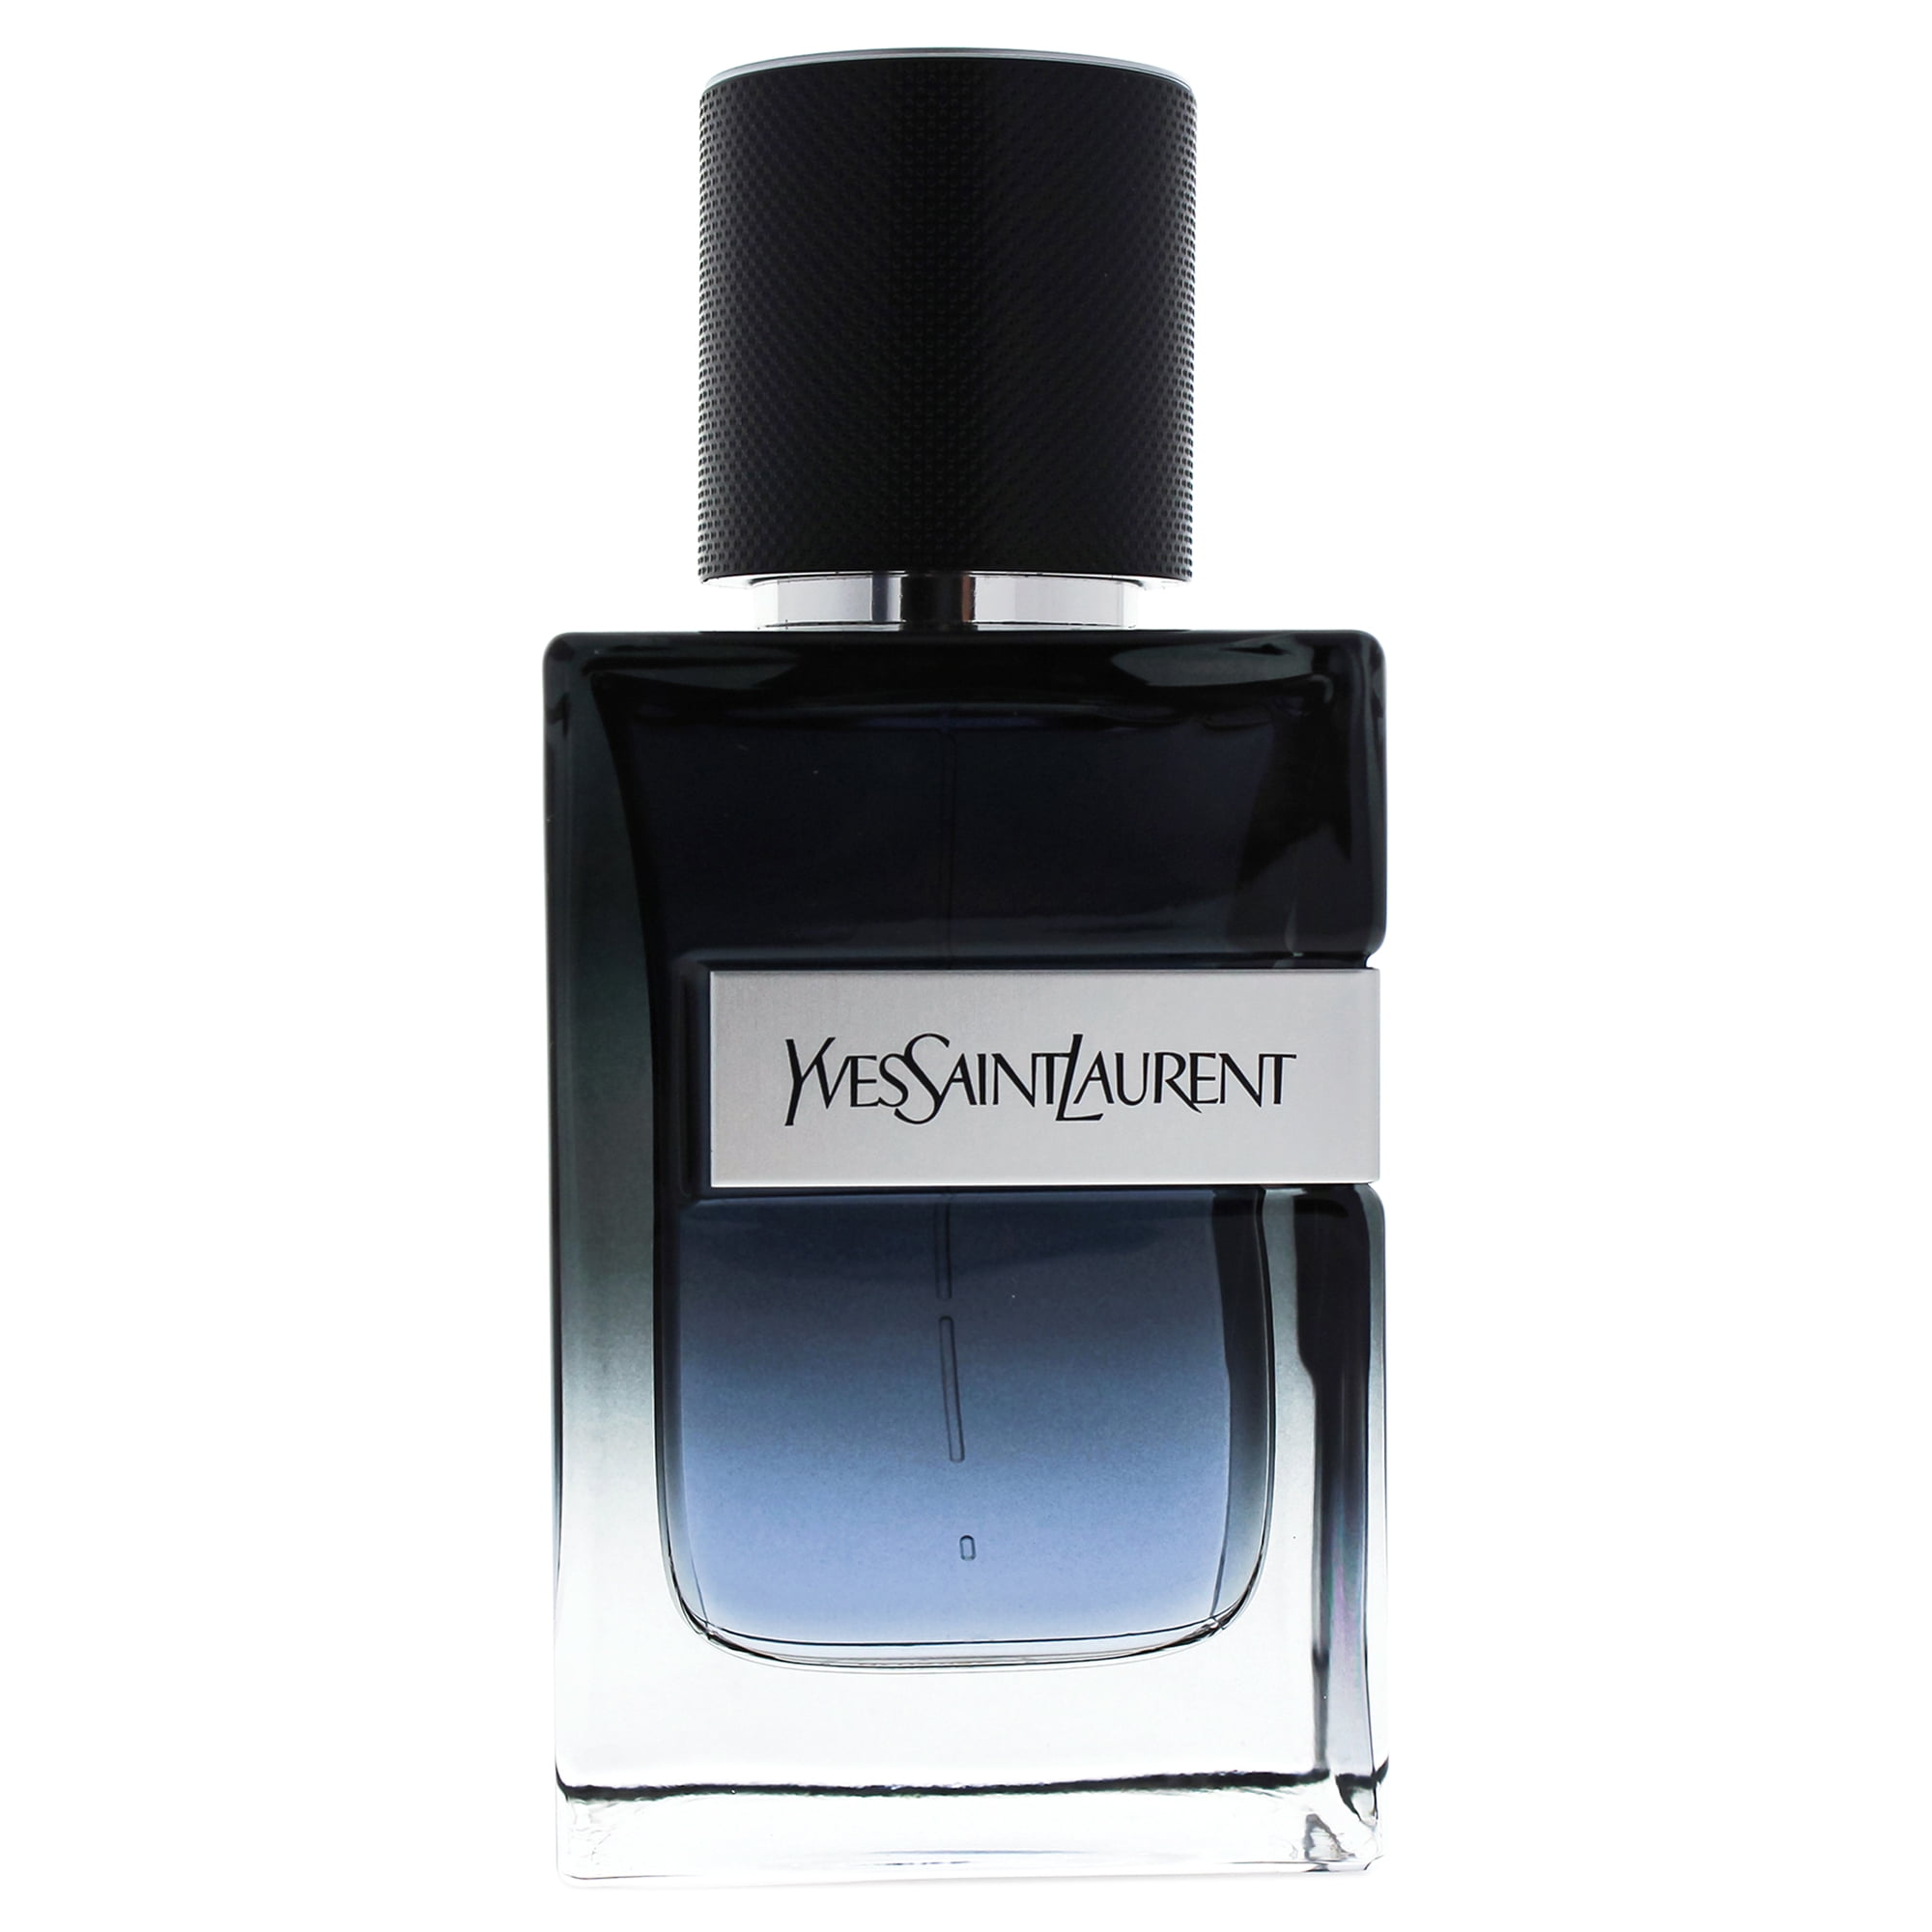 The Top 10 Yves Saint Laurent Perfumes - A Guide to Understanding and ...